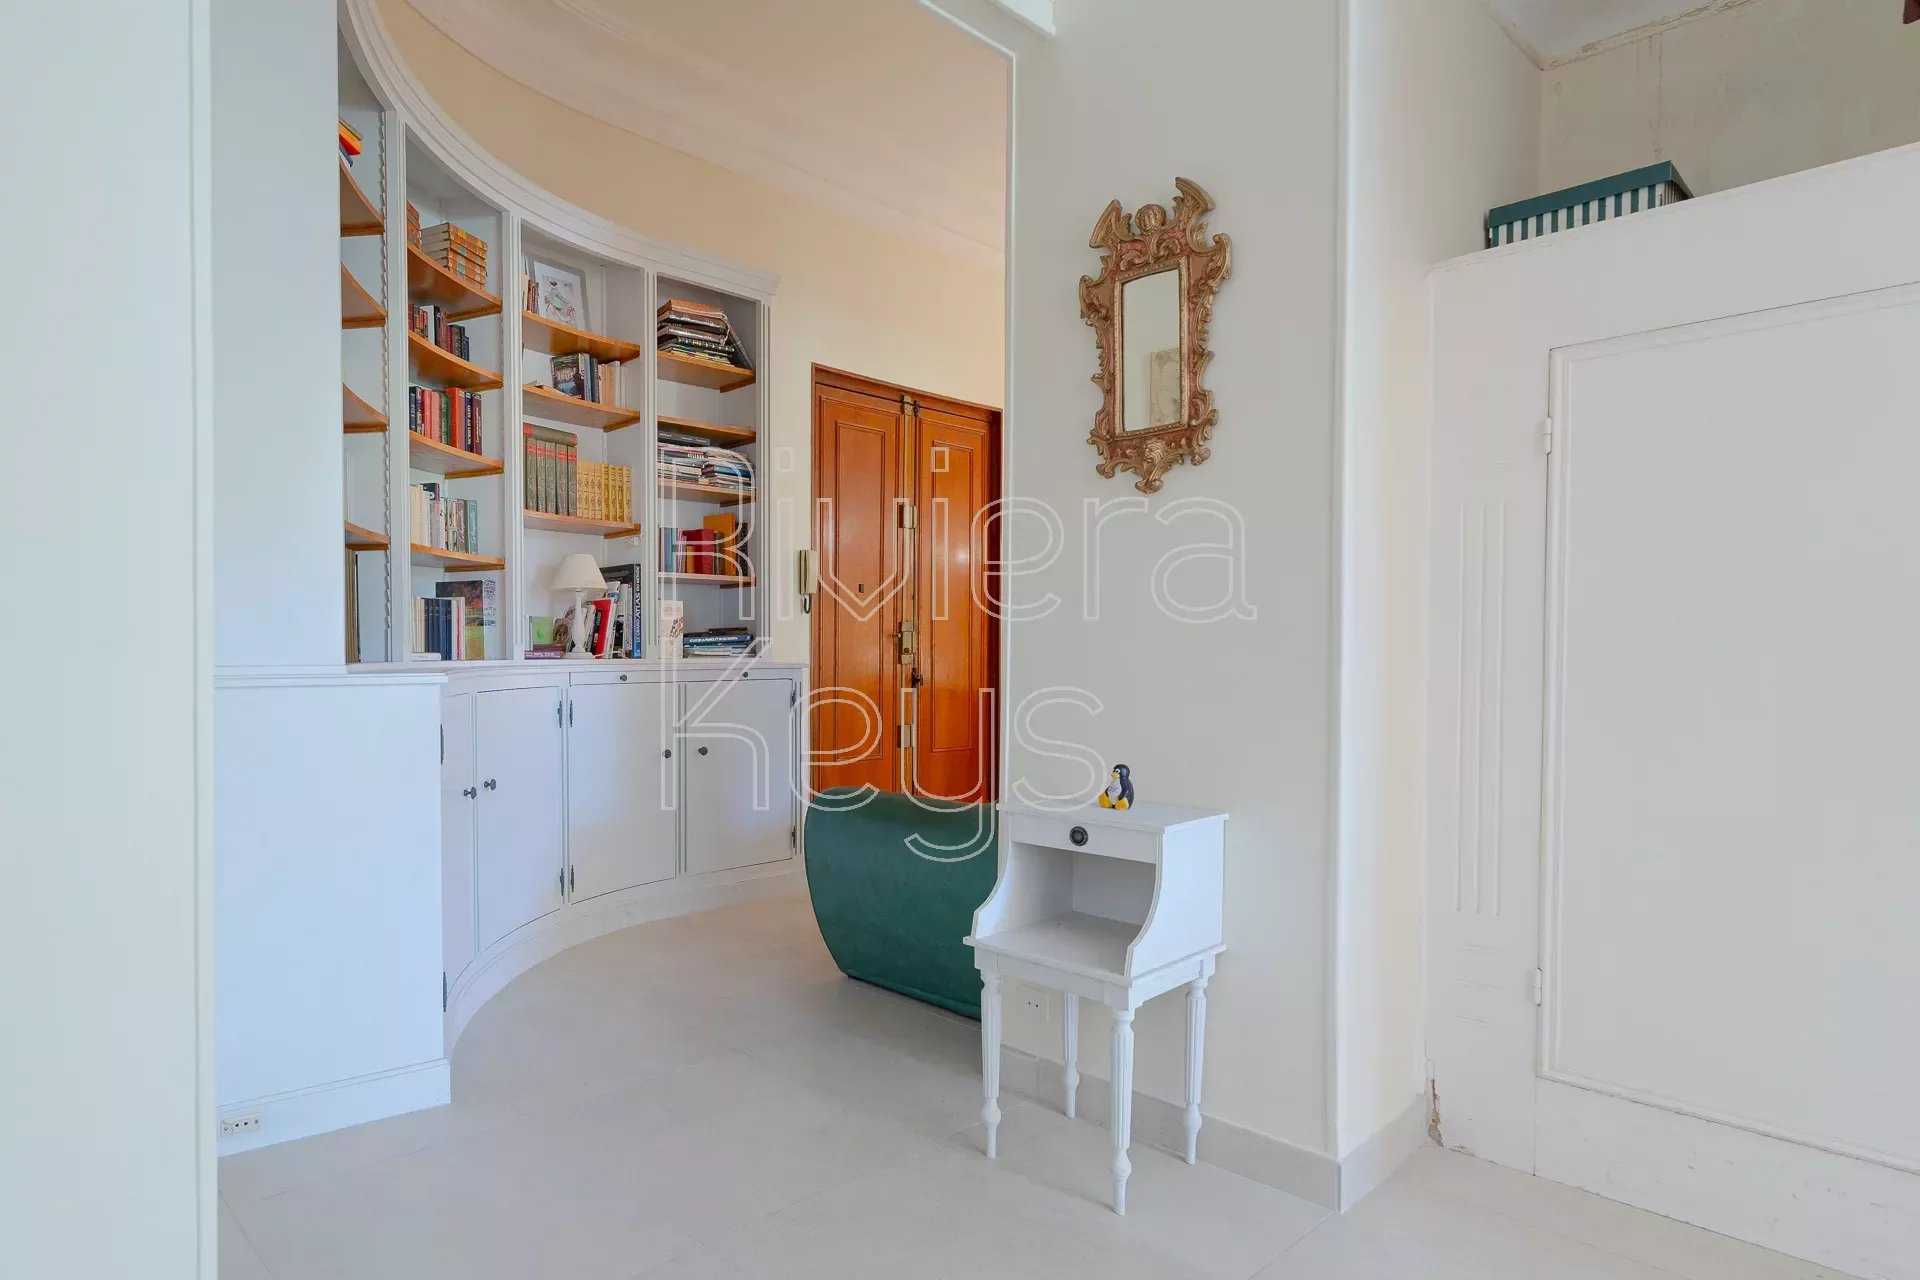 Residential in Nice, Alpes-Maritimes 12157060